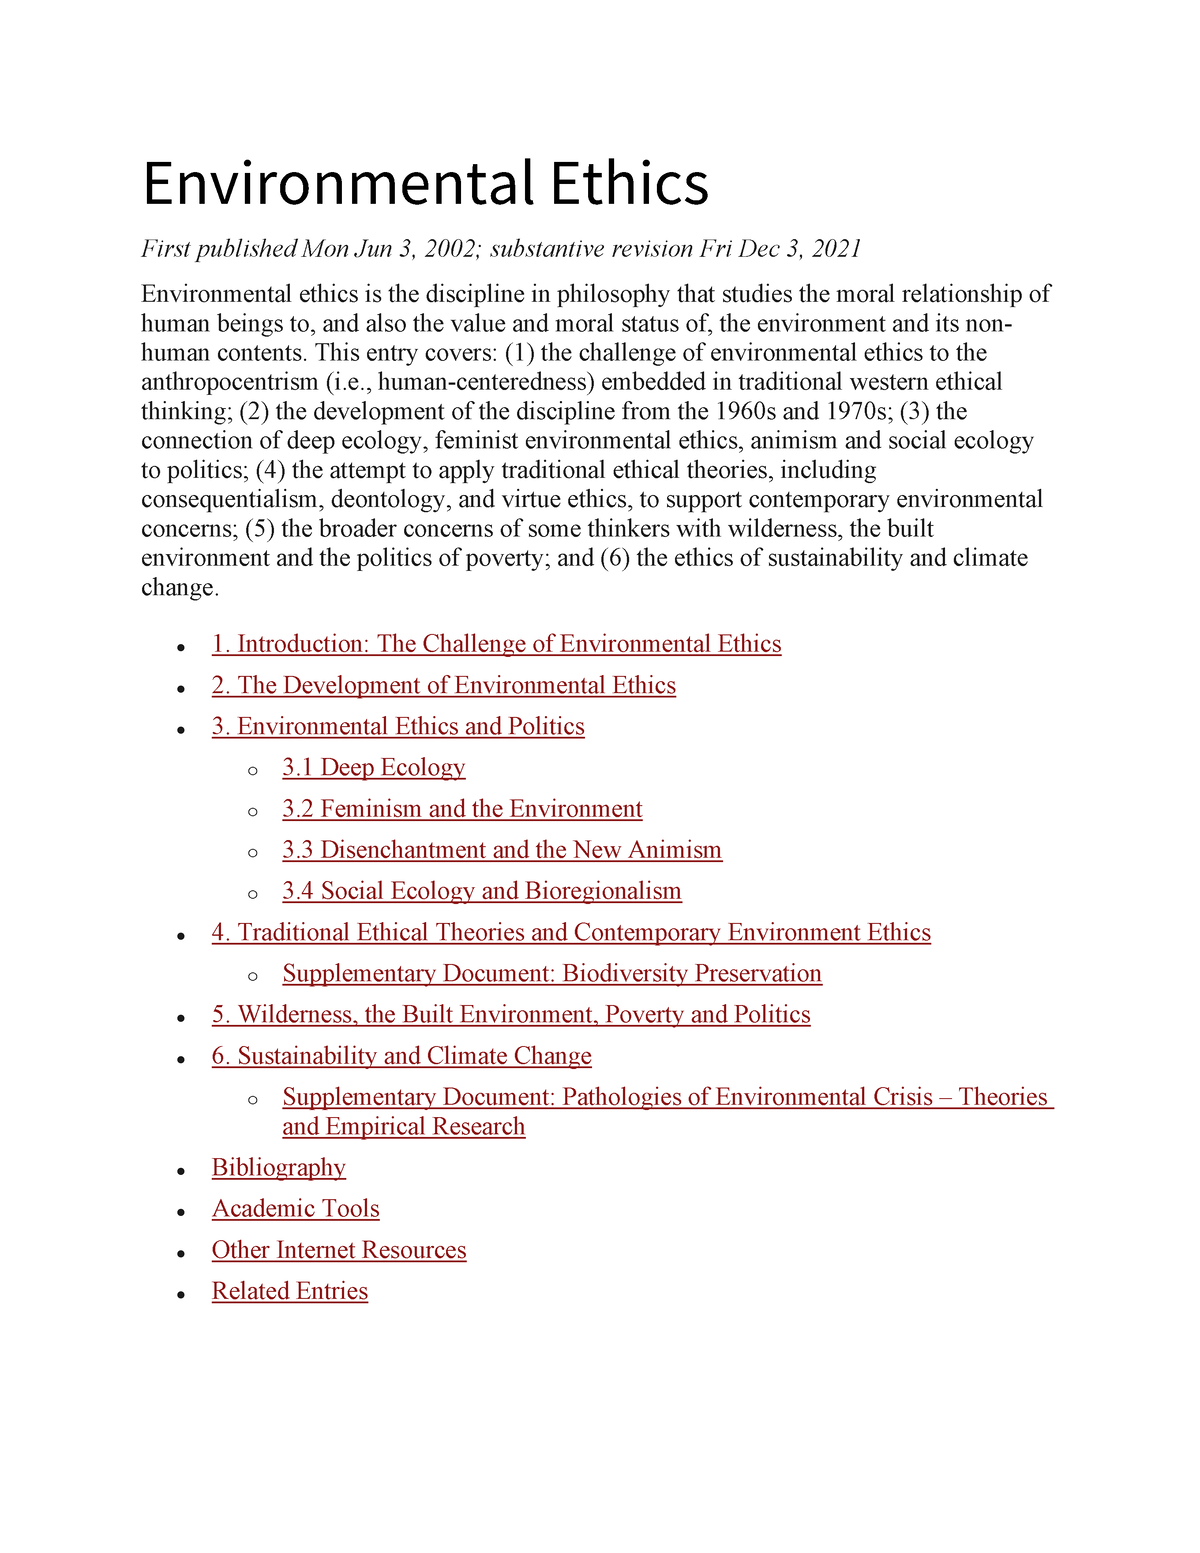 term paper about environmental ethics